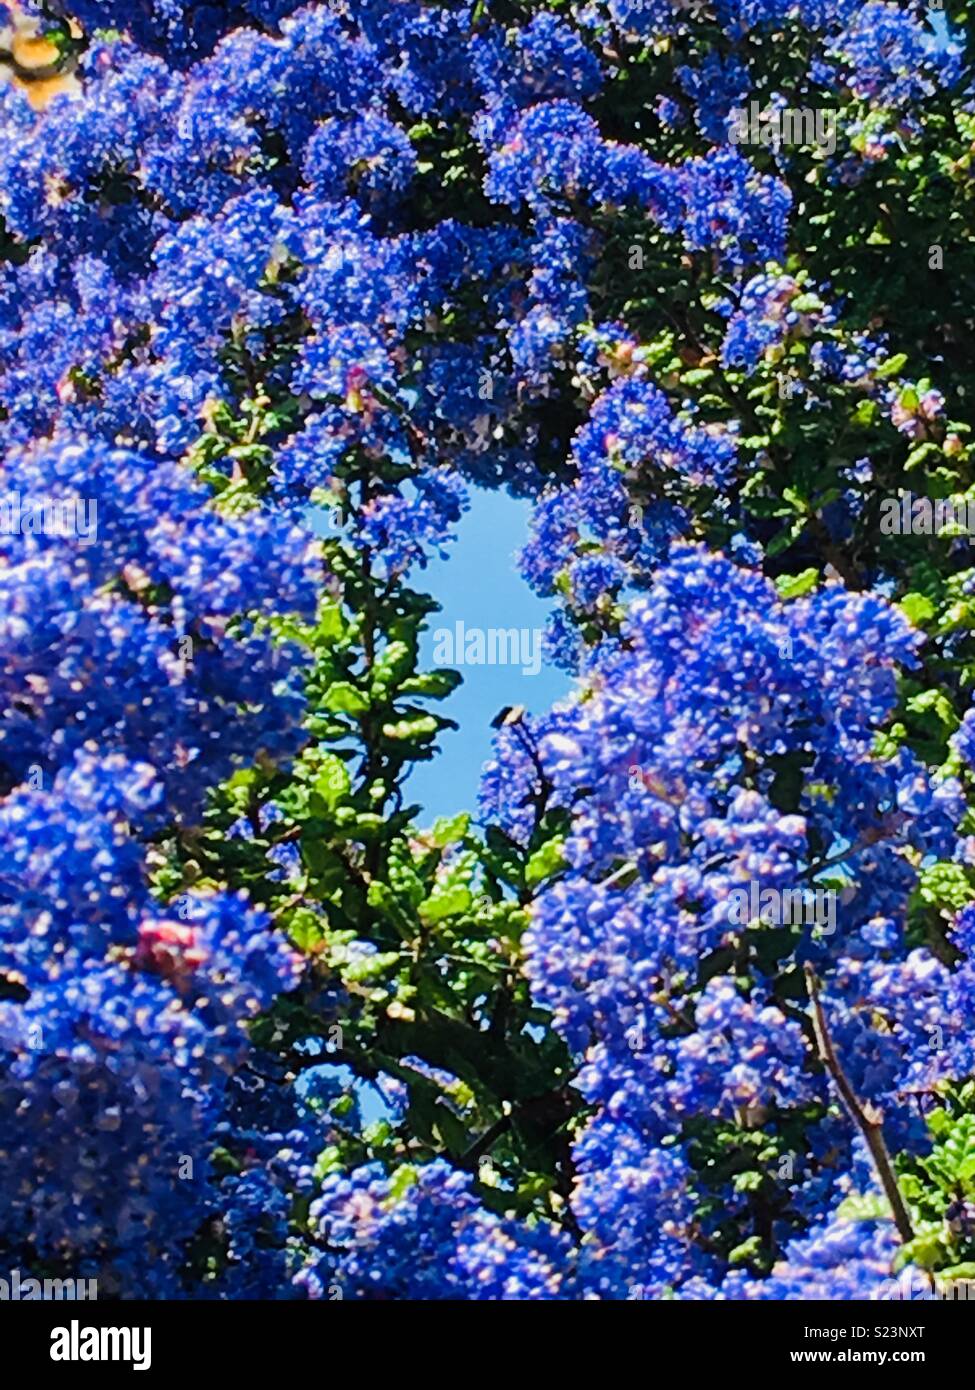 A patch of blue . Ceanothus in bloom. Stock Photo